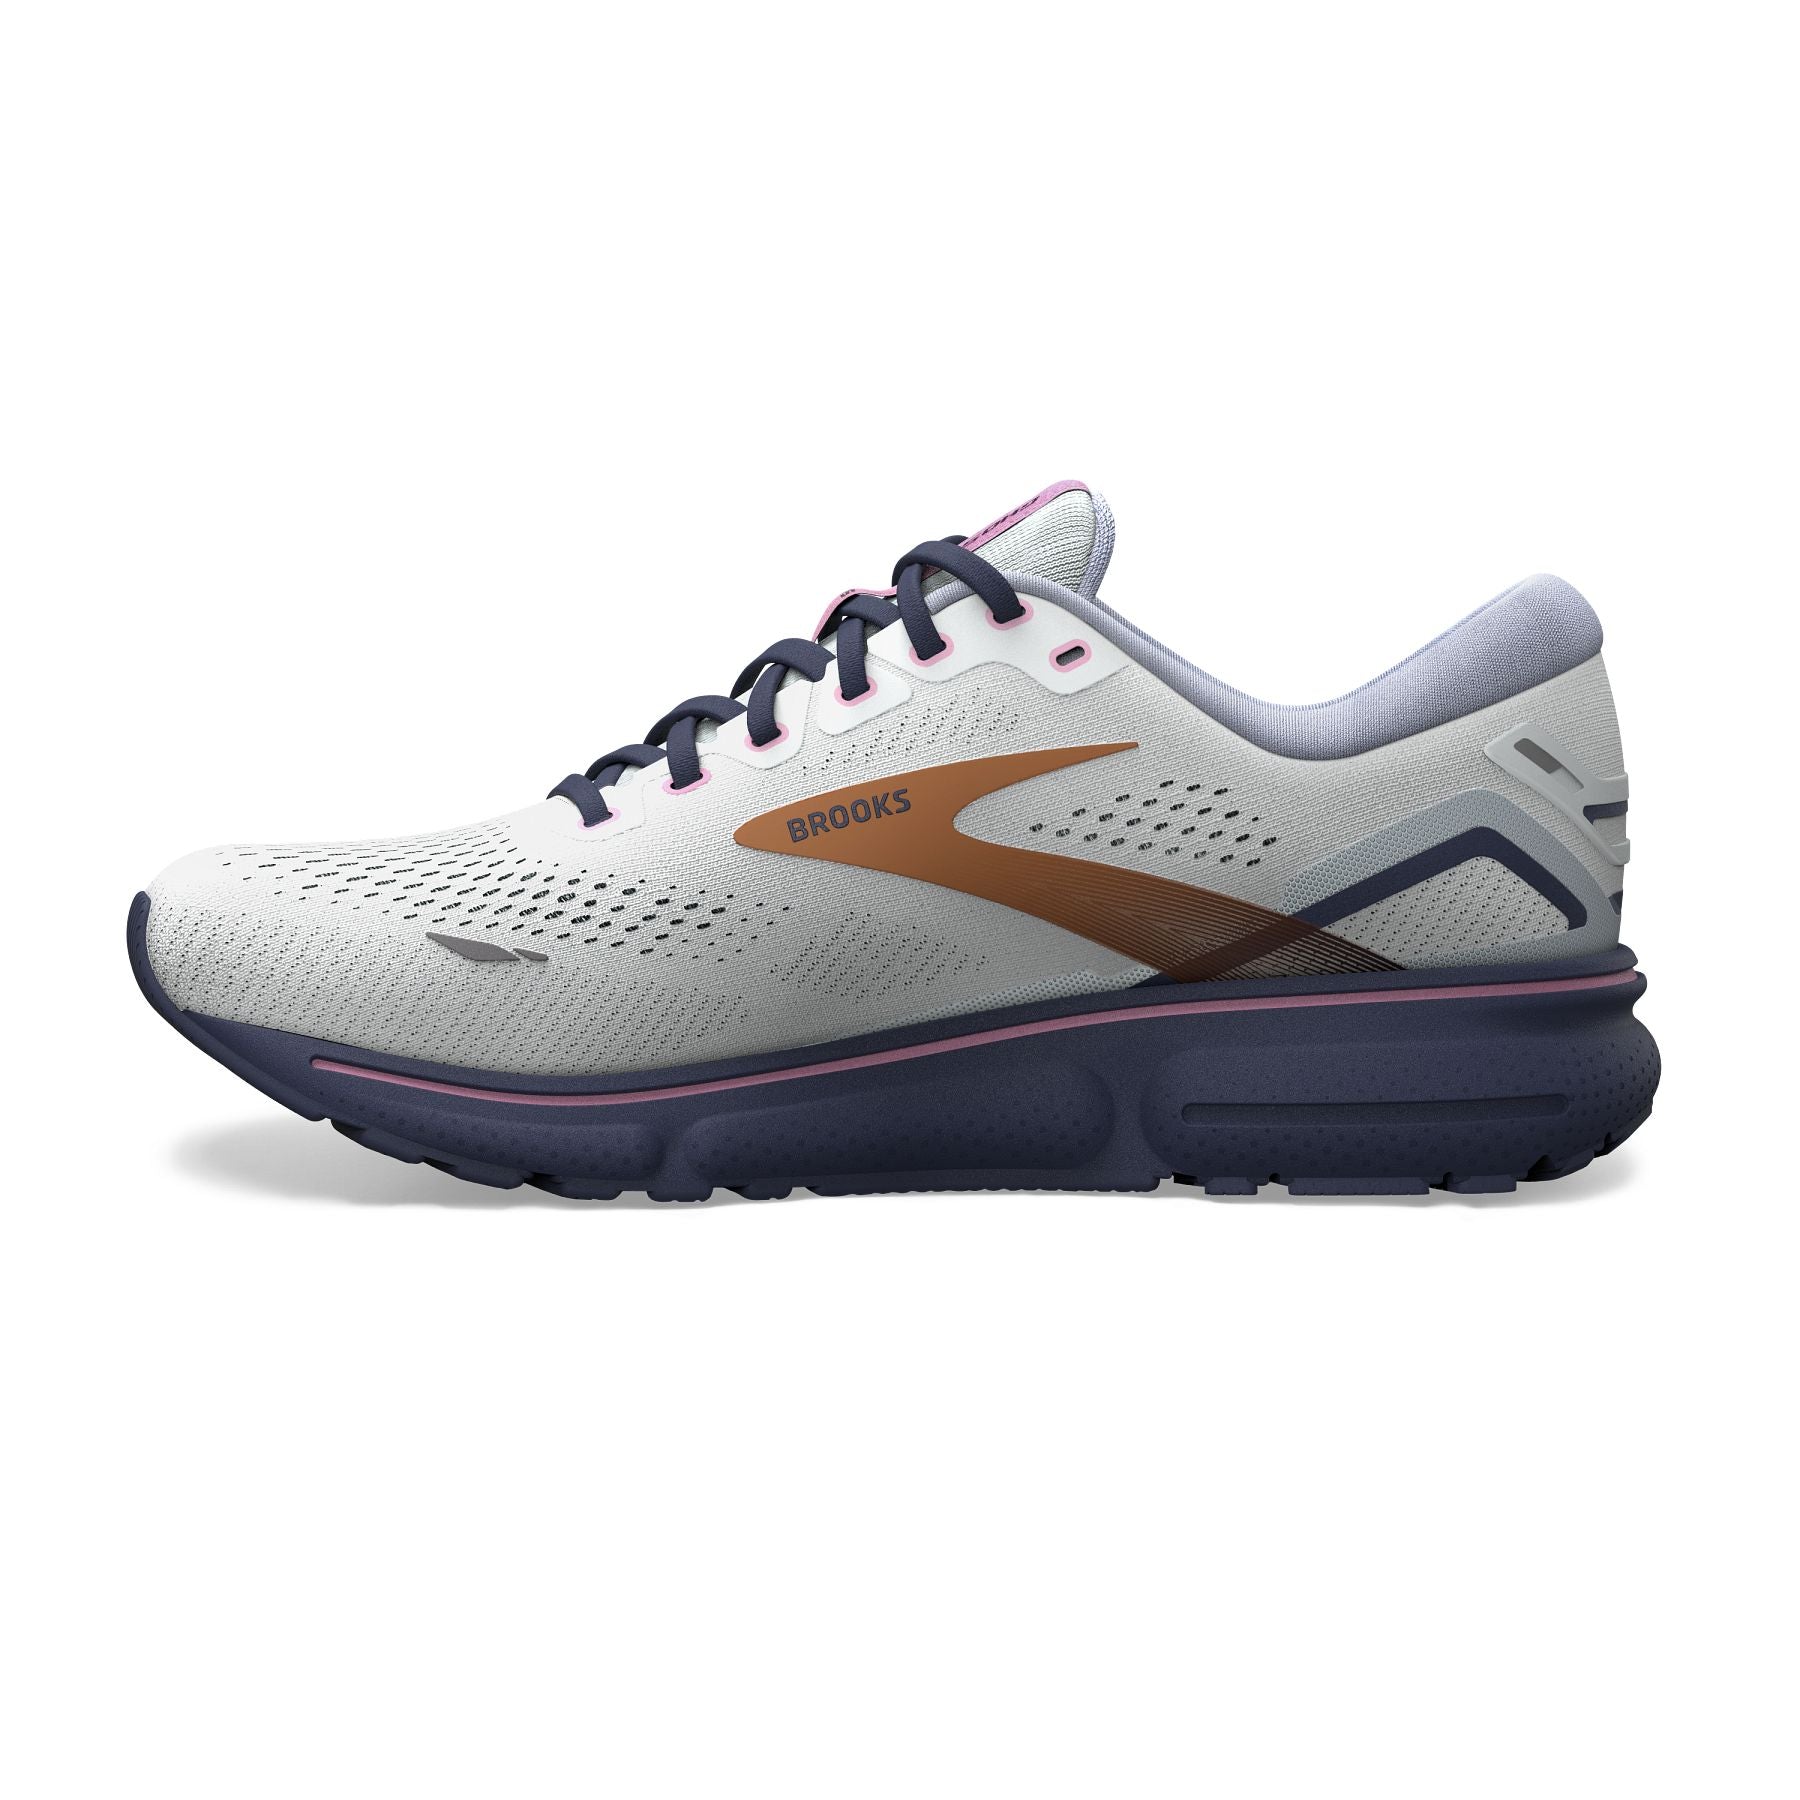 Medial view of the Brooks Women's Ghost 15 in Spa Blue/NeoPink/Copper